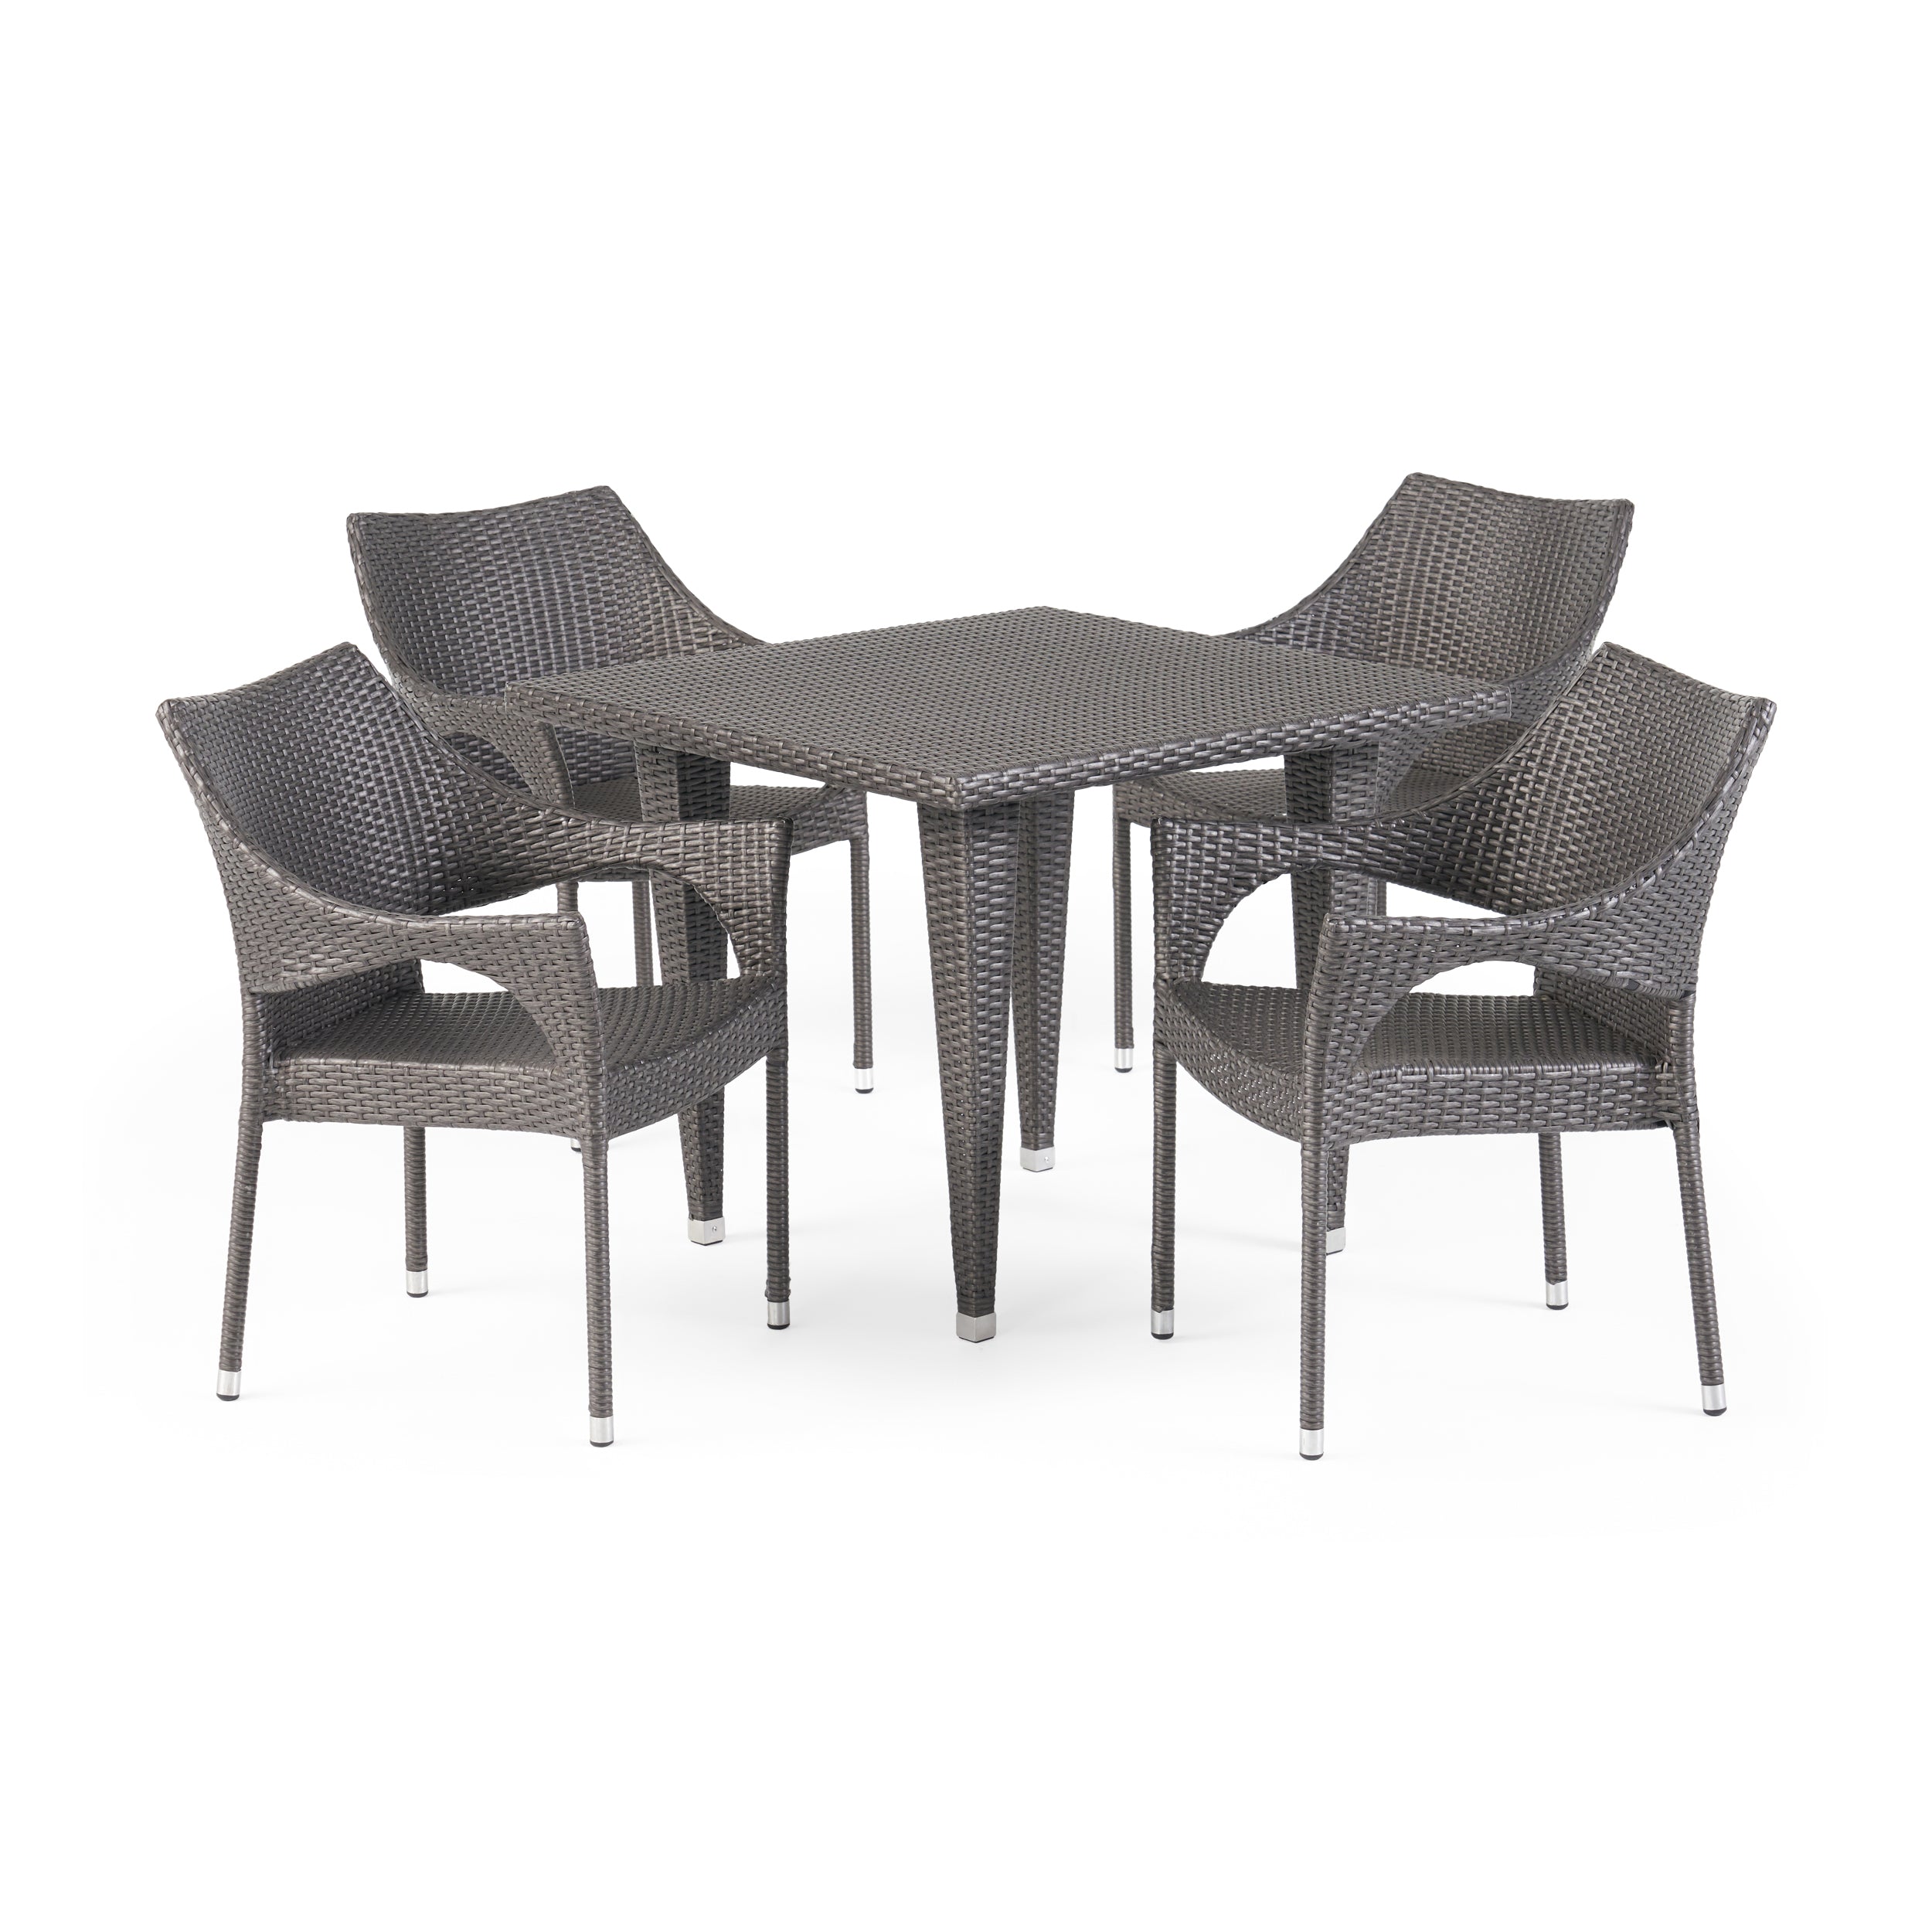 Alameda Outdoor 5 Piece Gray Wicker Dining Set with Stacking Chairs Default Title